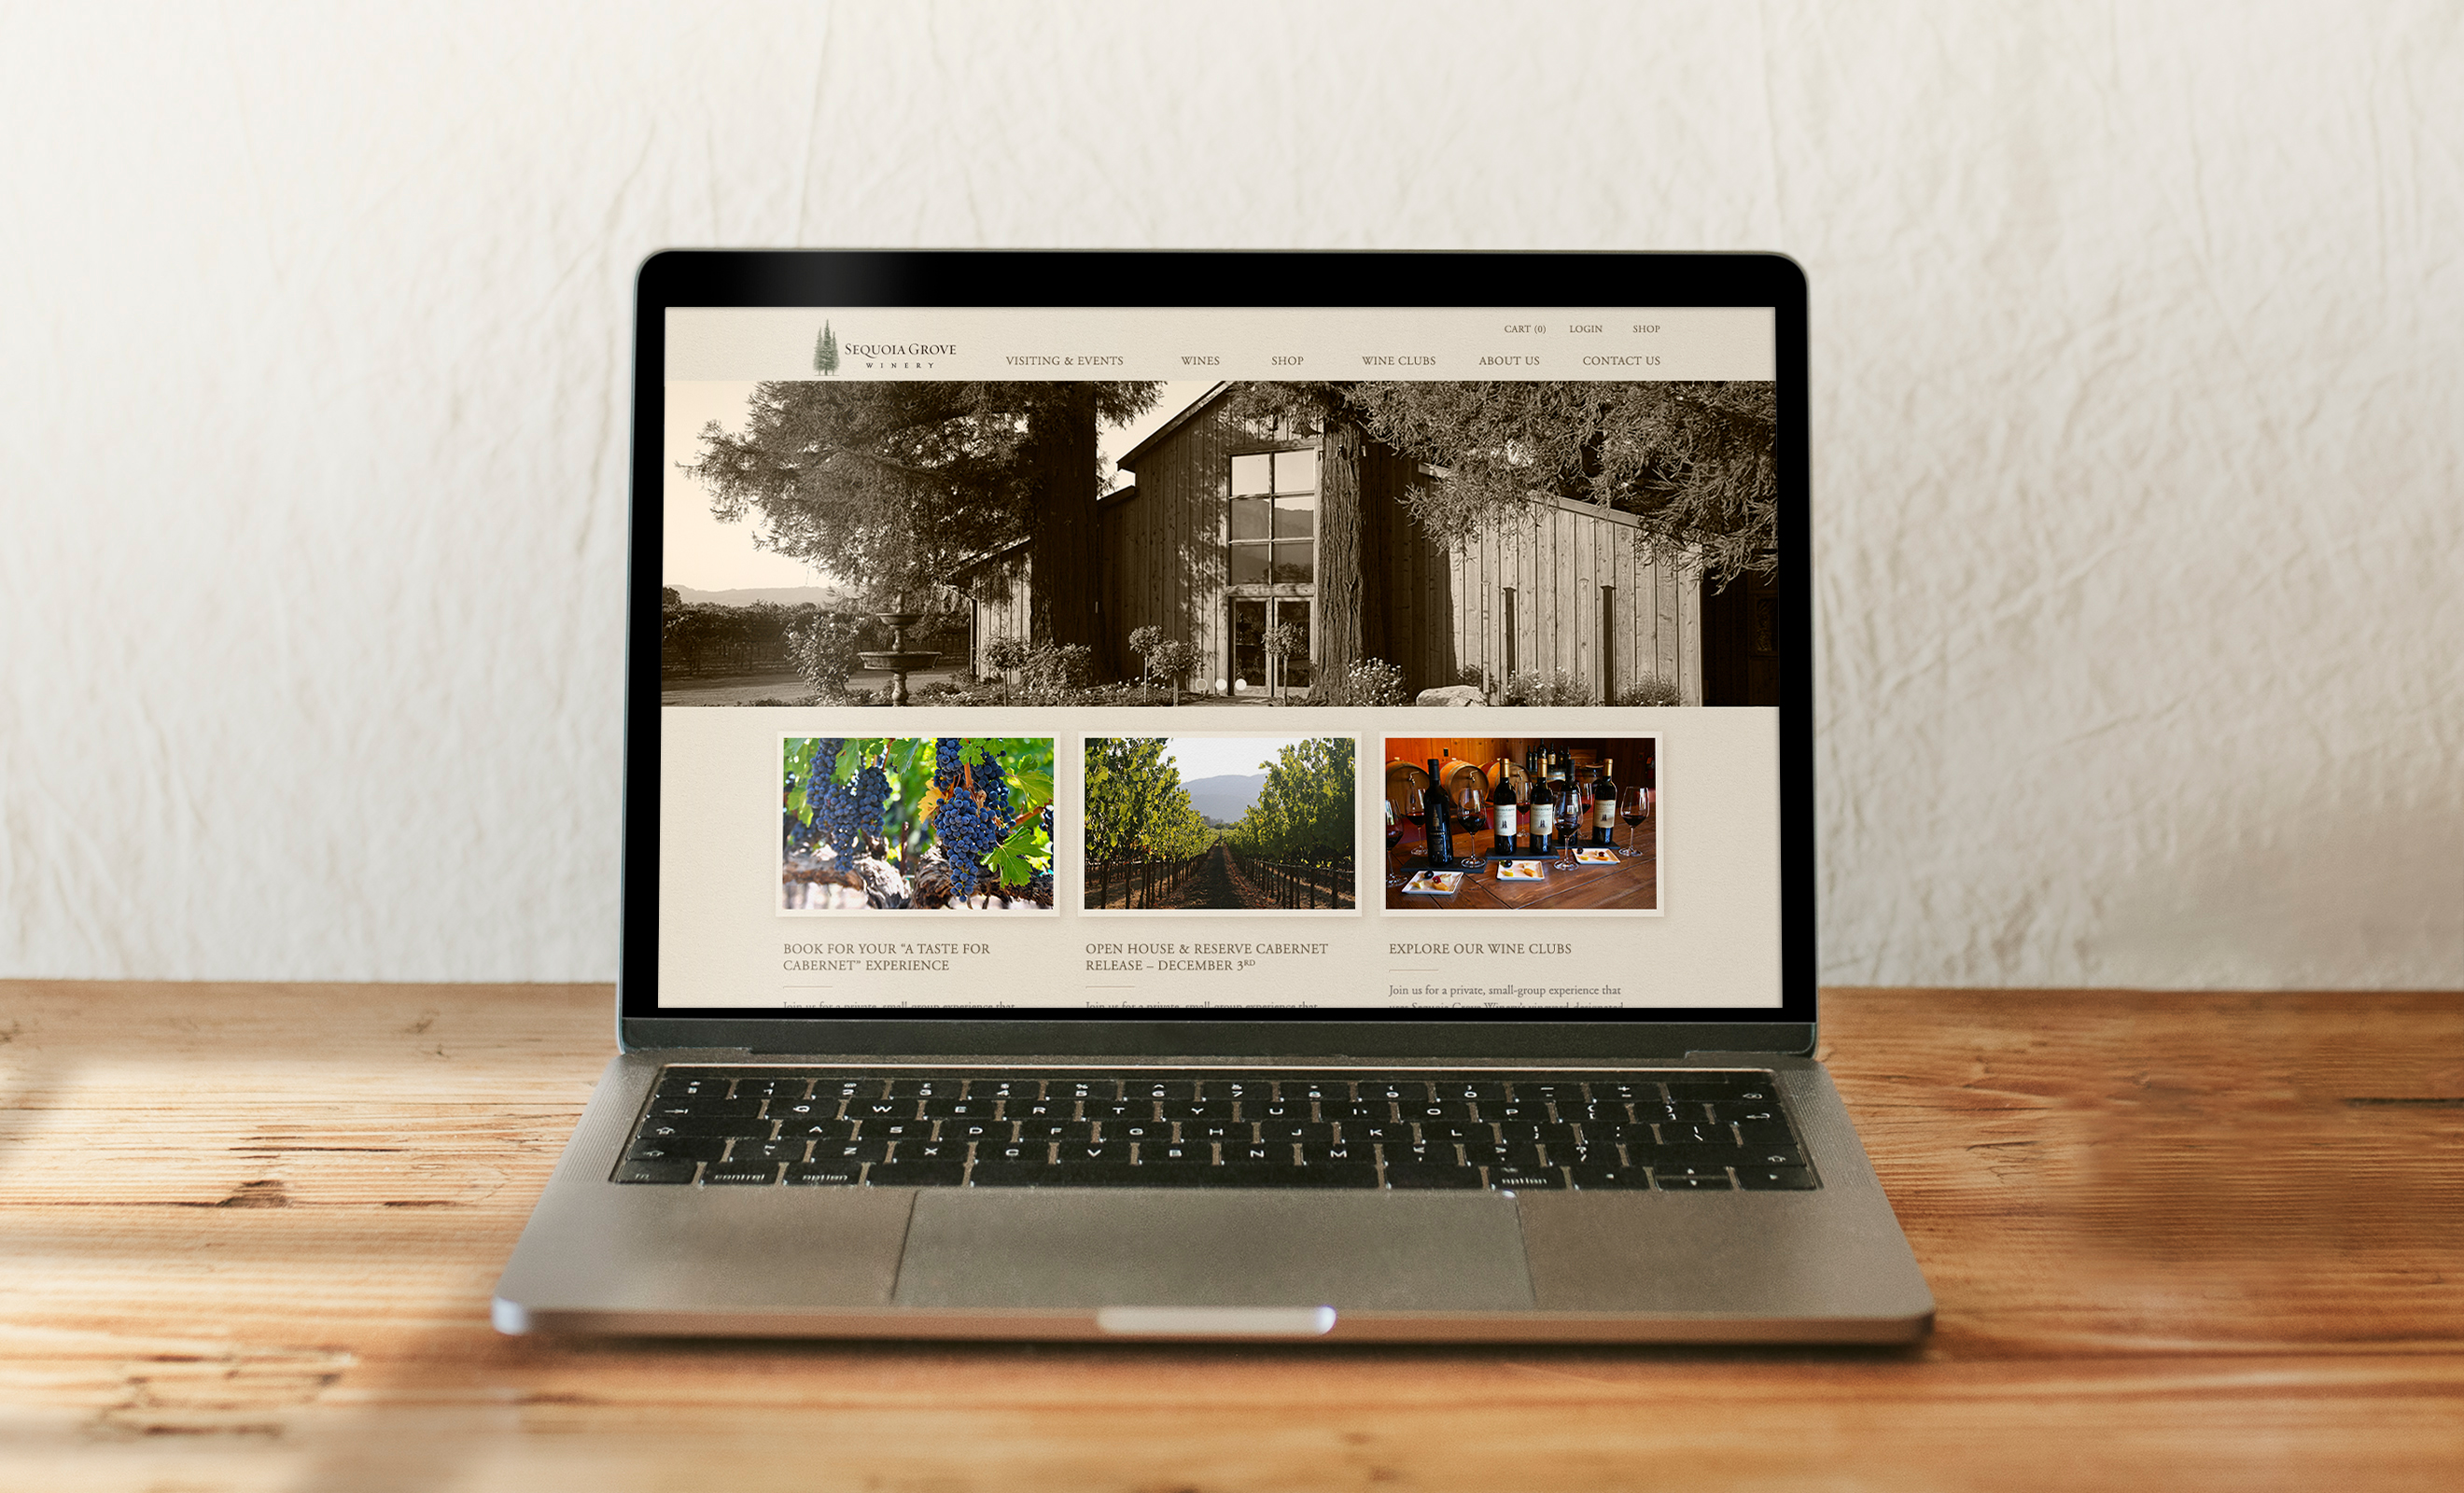 Sequoia Grove Home Page Website Design Shown on Laptop